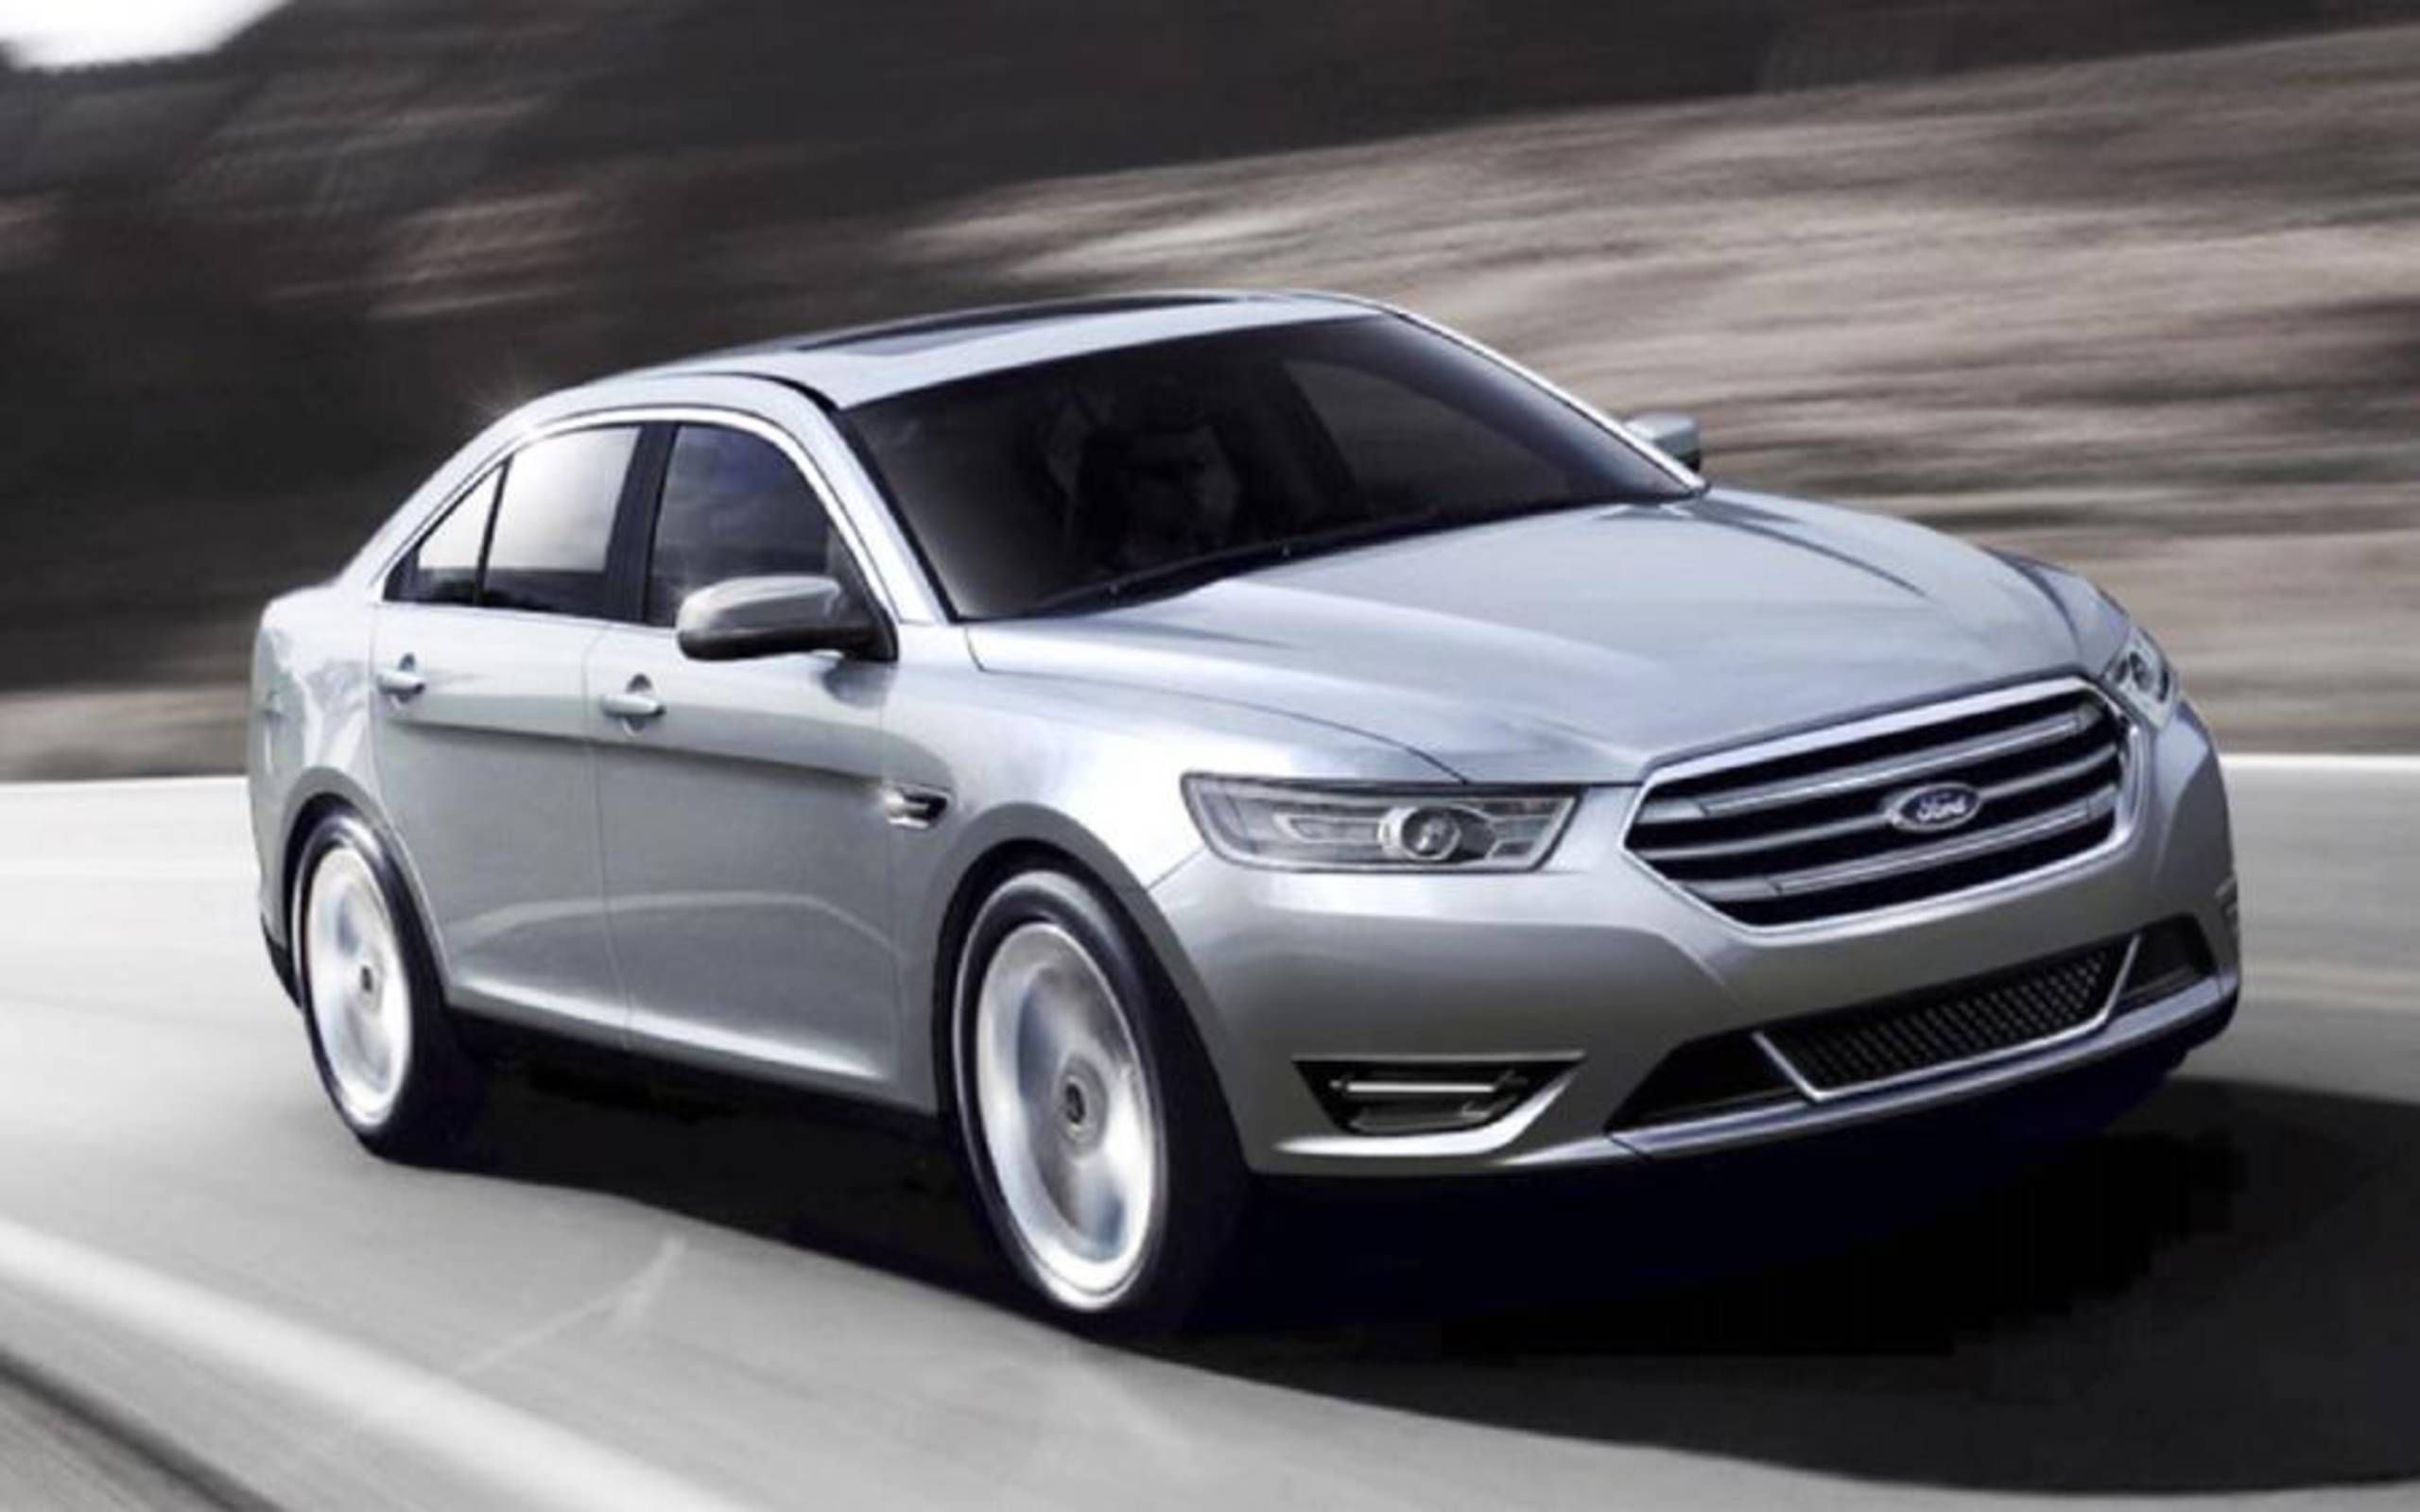 2013 Ford Taurus Limited review notes: Big American sedan comfort